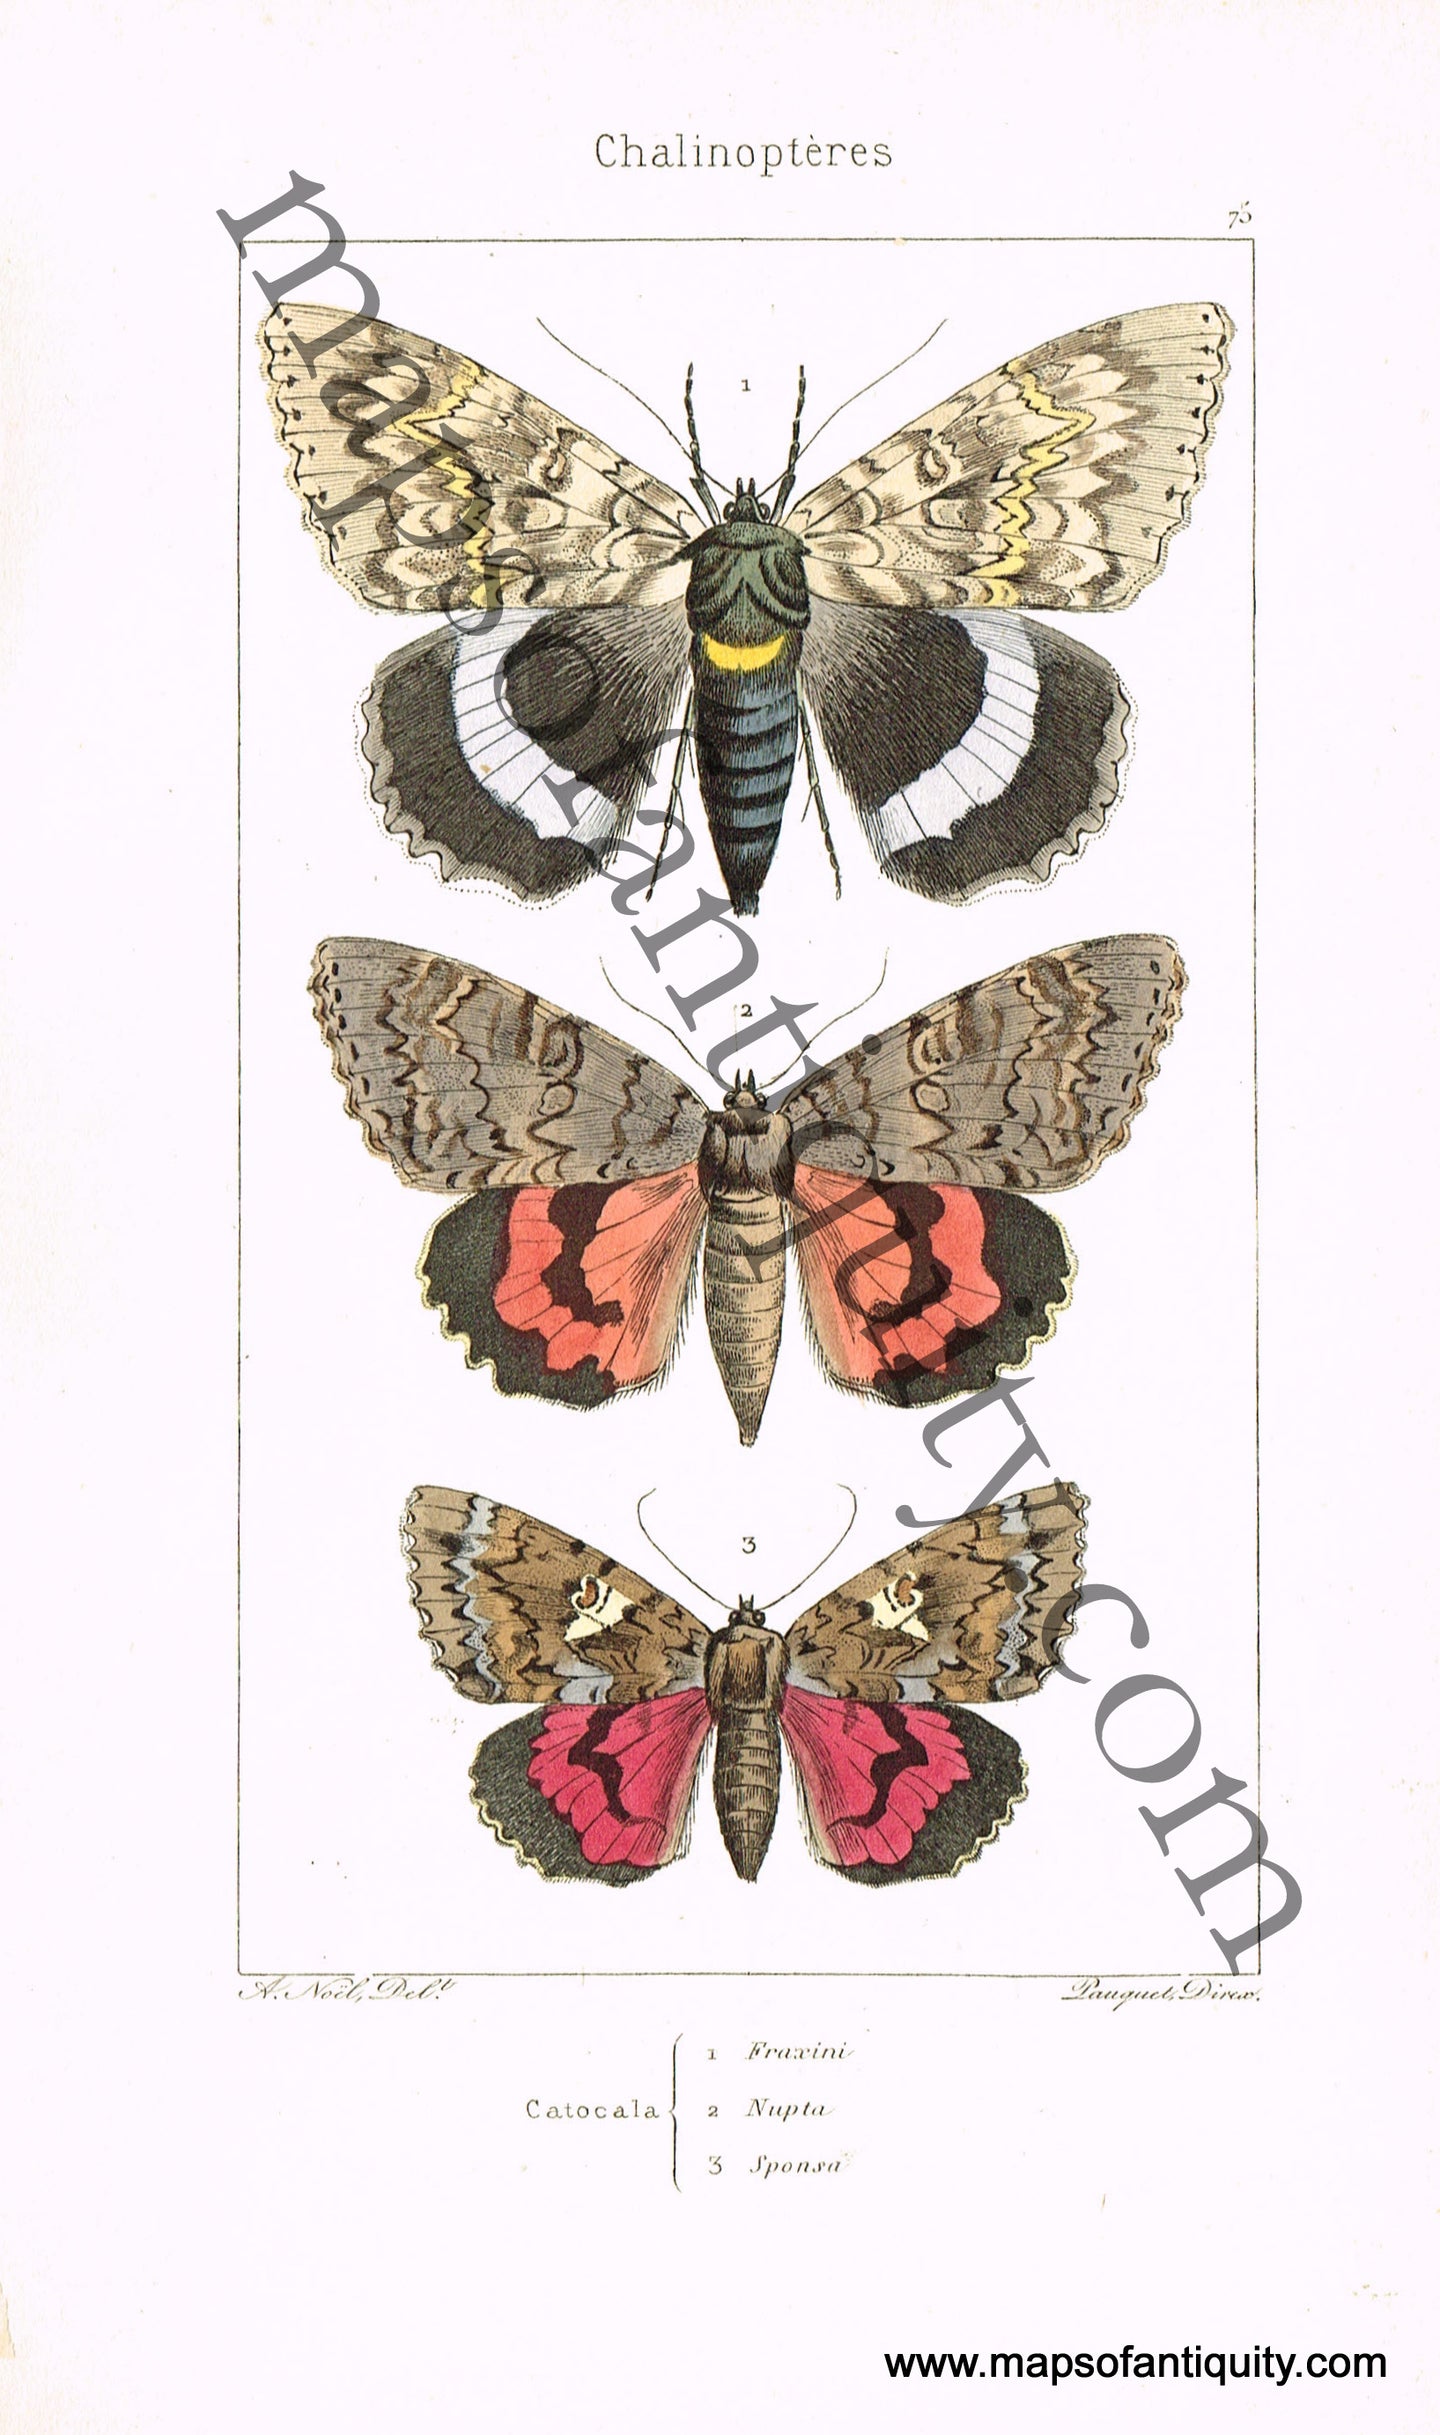 Antique-Hand-Colored-Print-Catocala-fraxinia-Catocala-nupta-&-Catocala-sponsa-Antique-Prints-Natural-History-Insects-1864-Lucas-Maps-Of-Antiquity